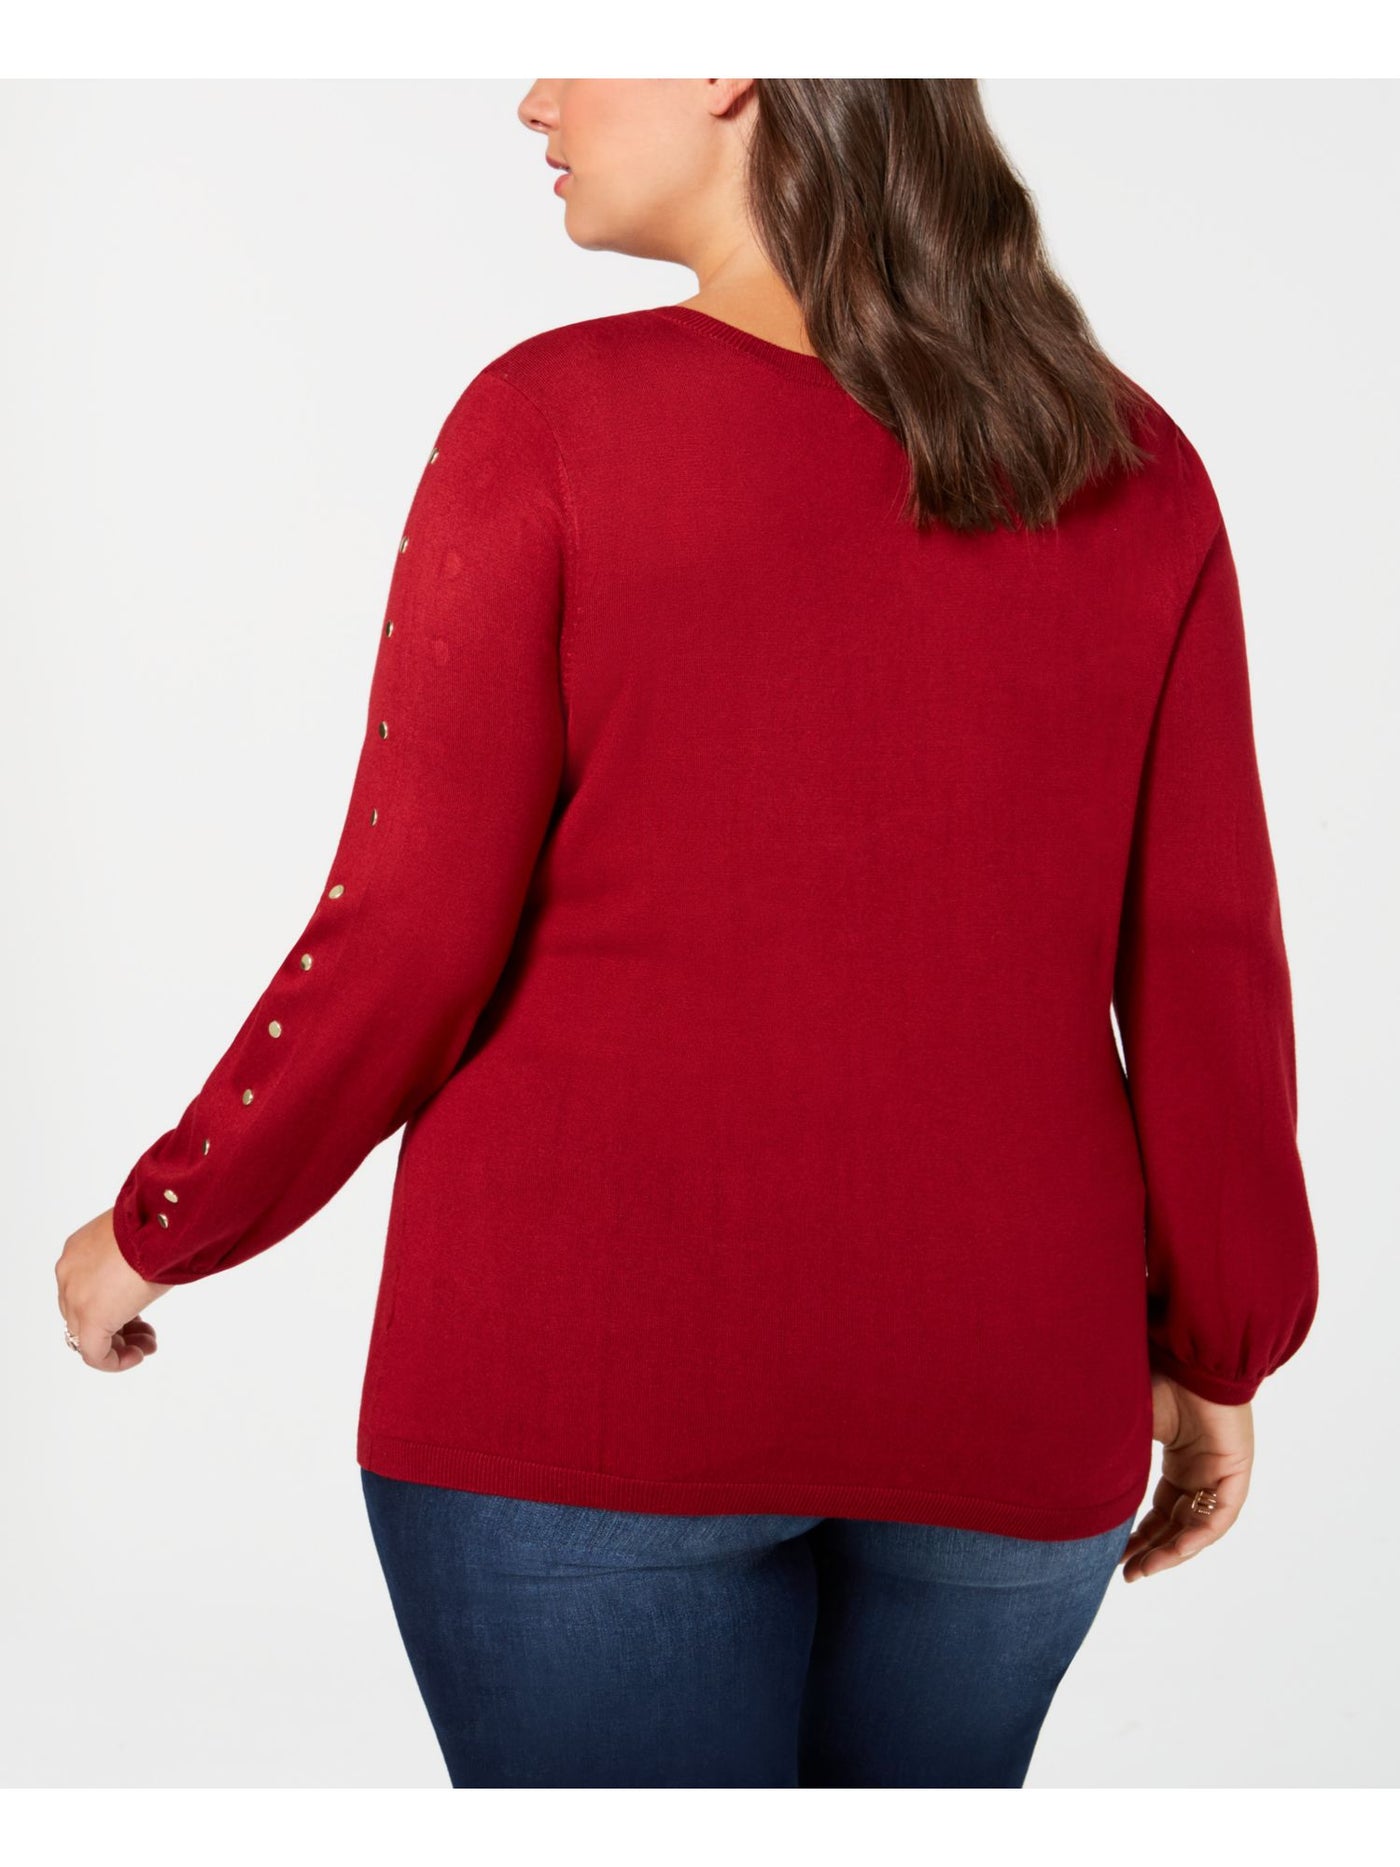 ONE A Womens Red Long Sleeve Scoop Neck Sweater Plus 1X